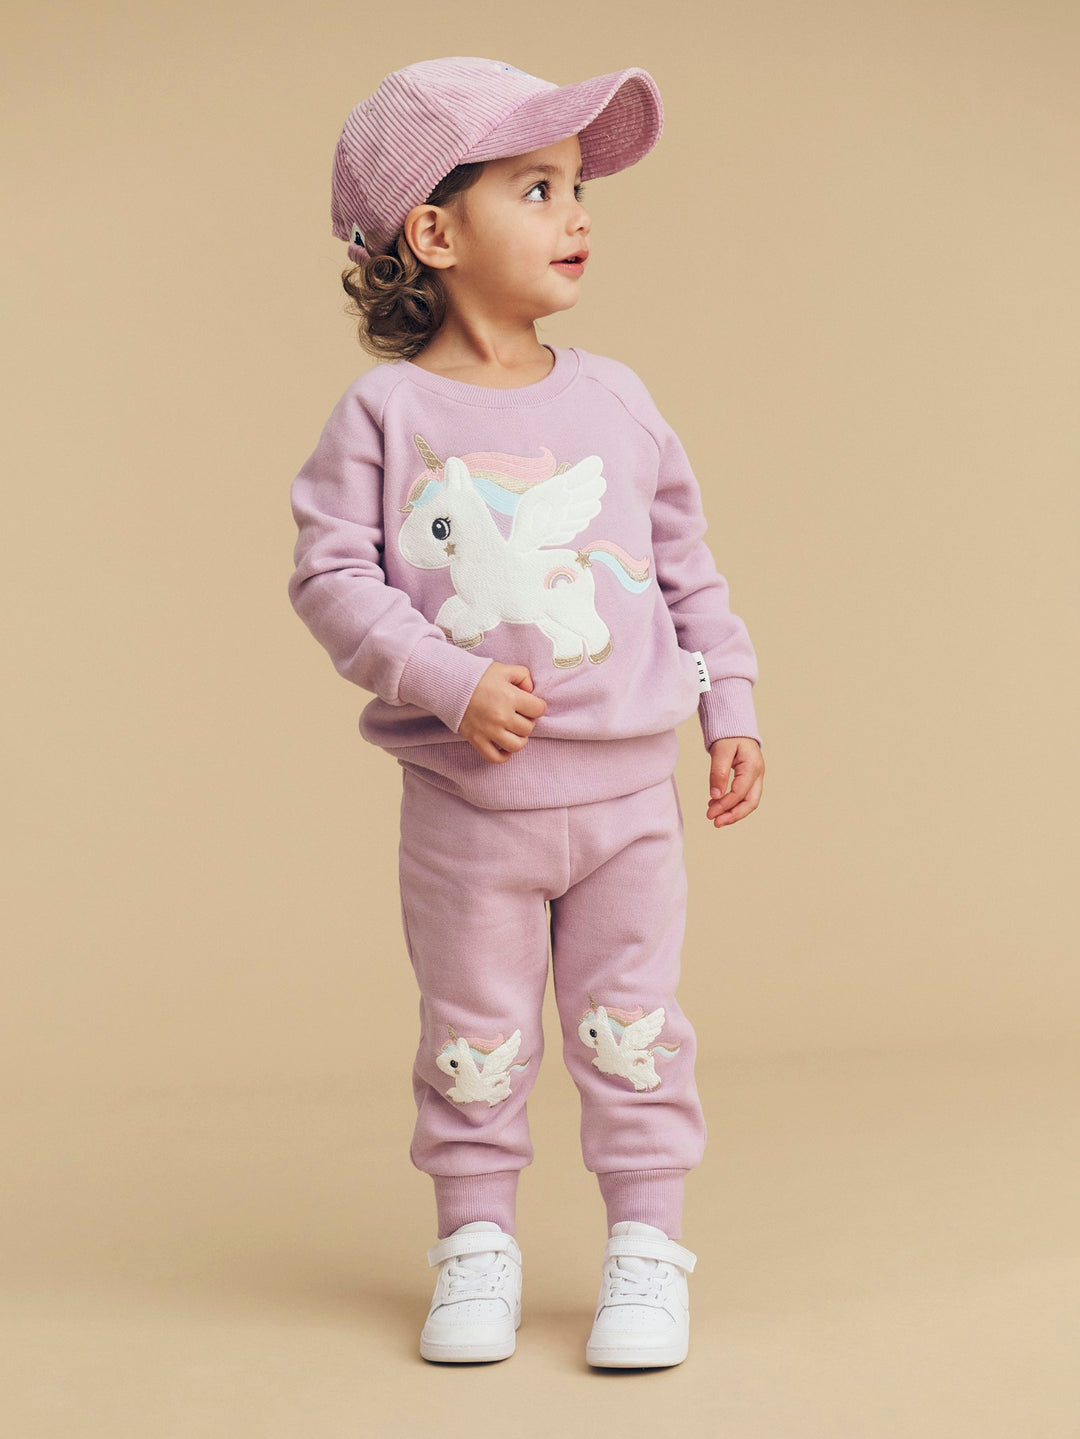 Huxbaby Magical Unicorn Retro Track Pant - Orchid